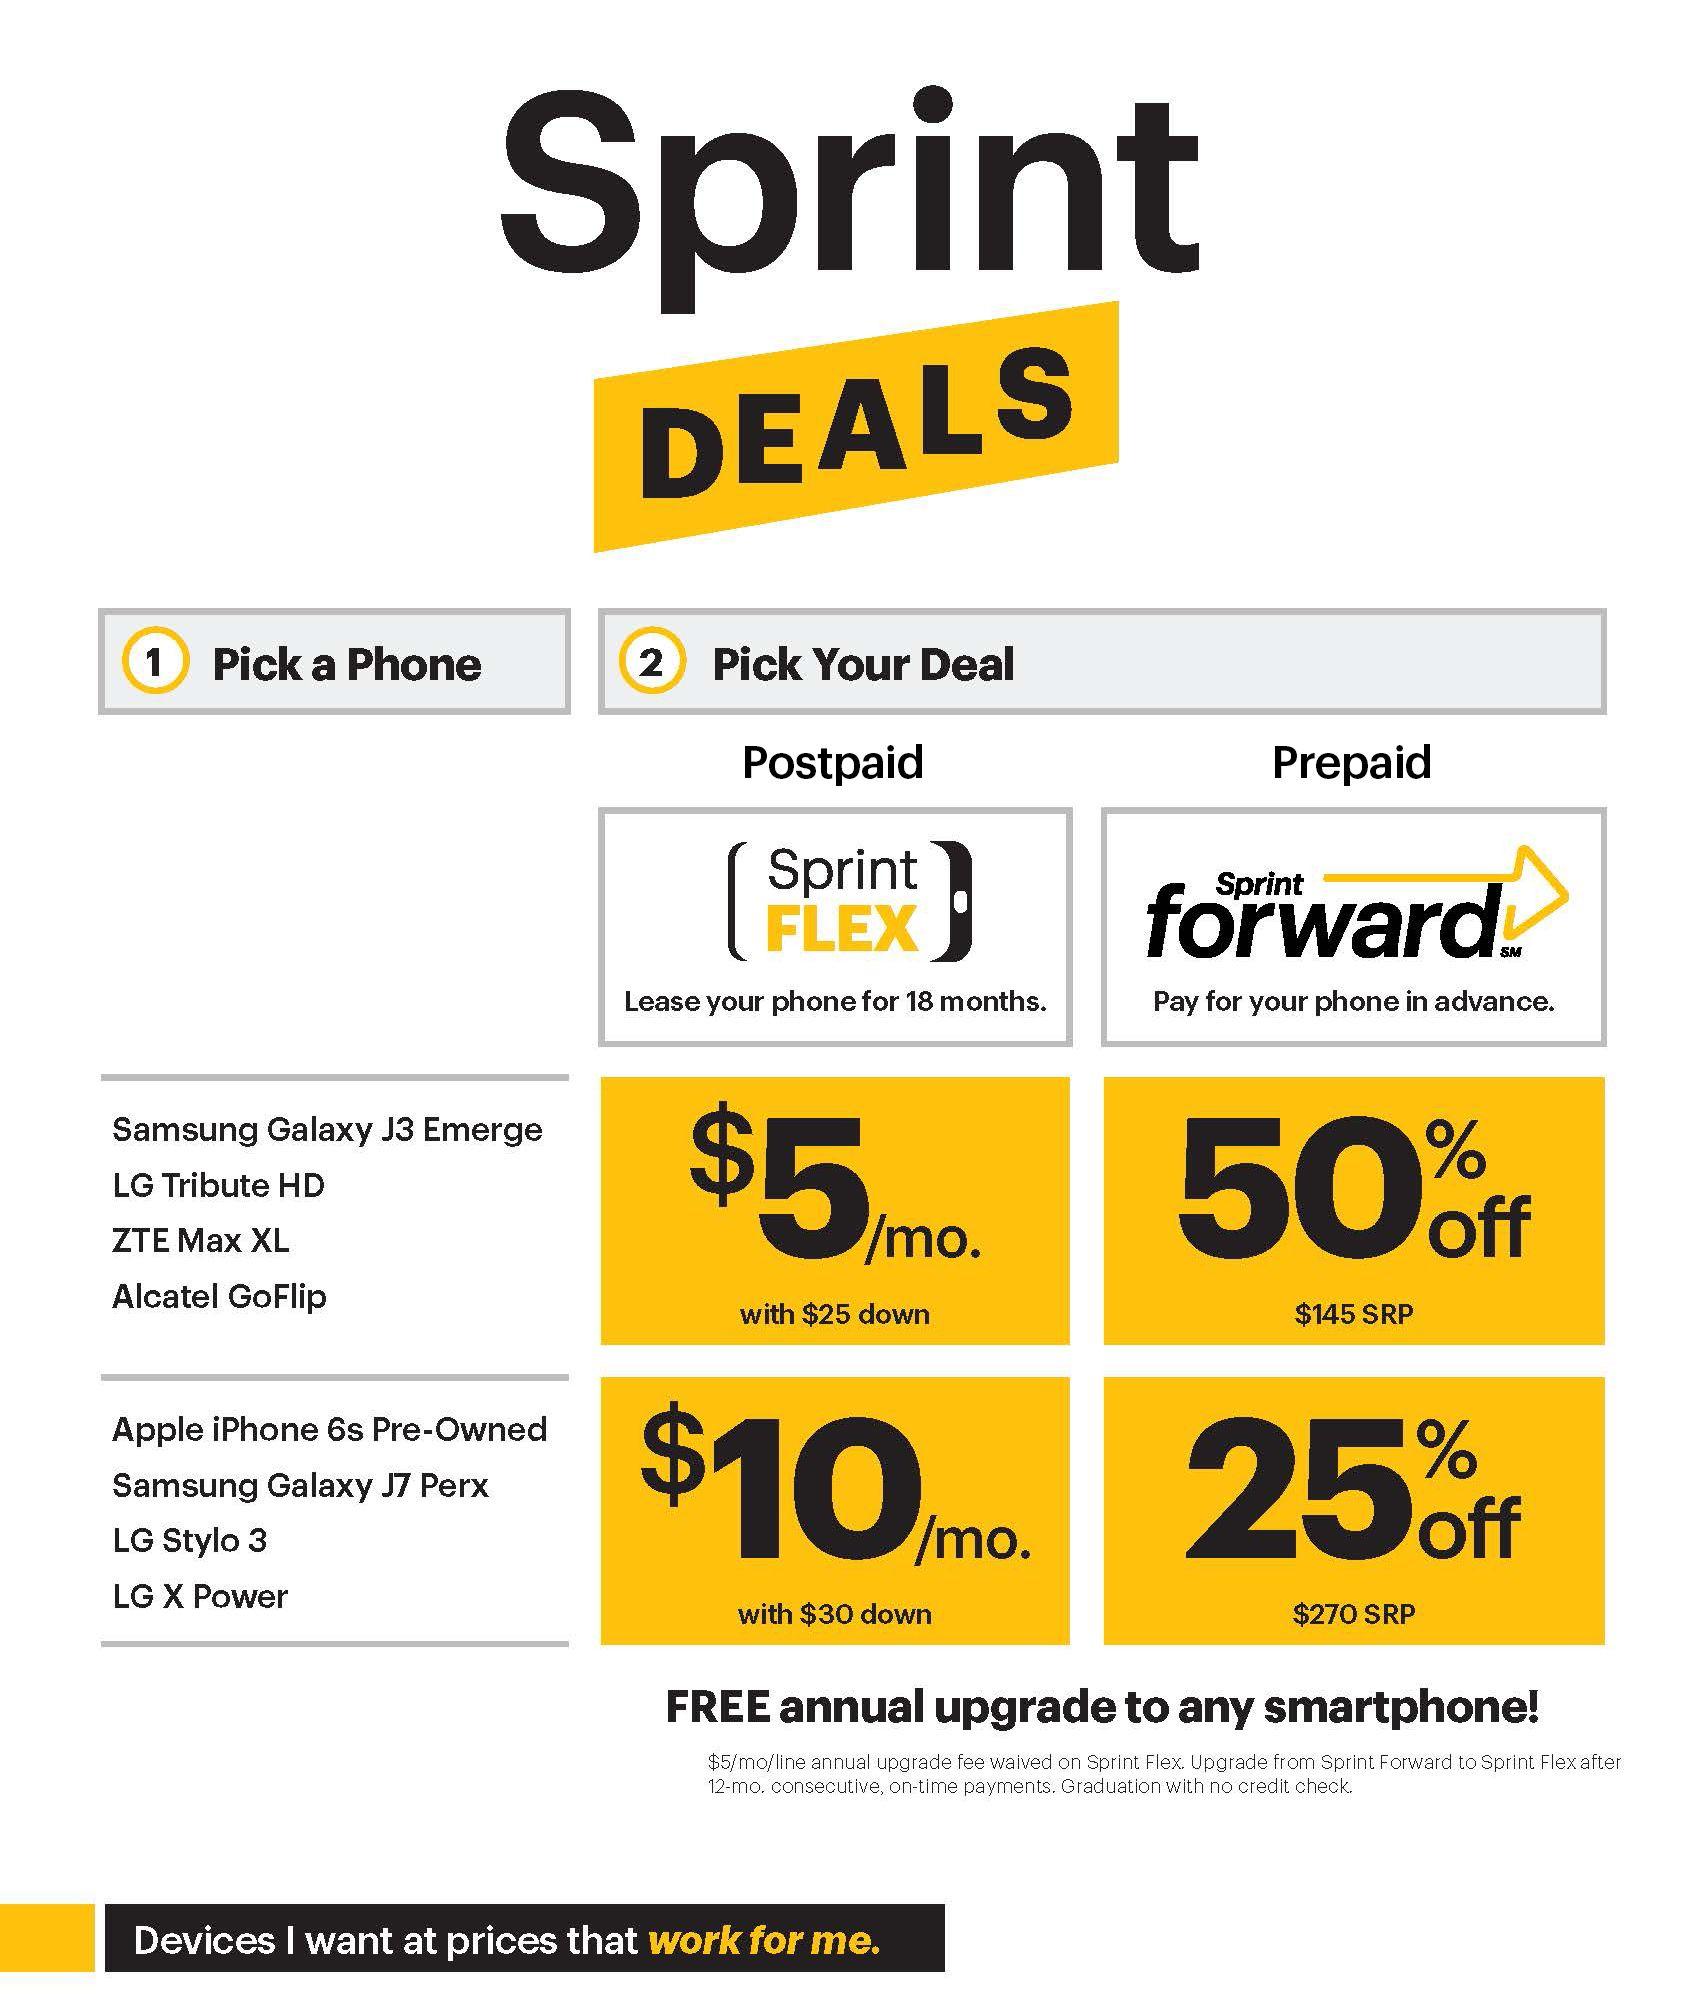 Sprint.com Logo - Sprint Flex is The Best Way to Get the Latest Smartphone | Business Wire